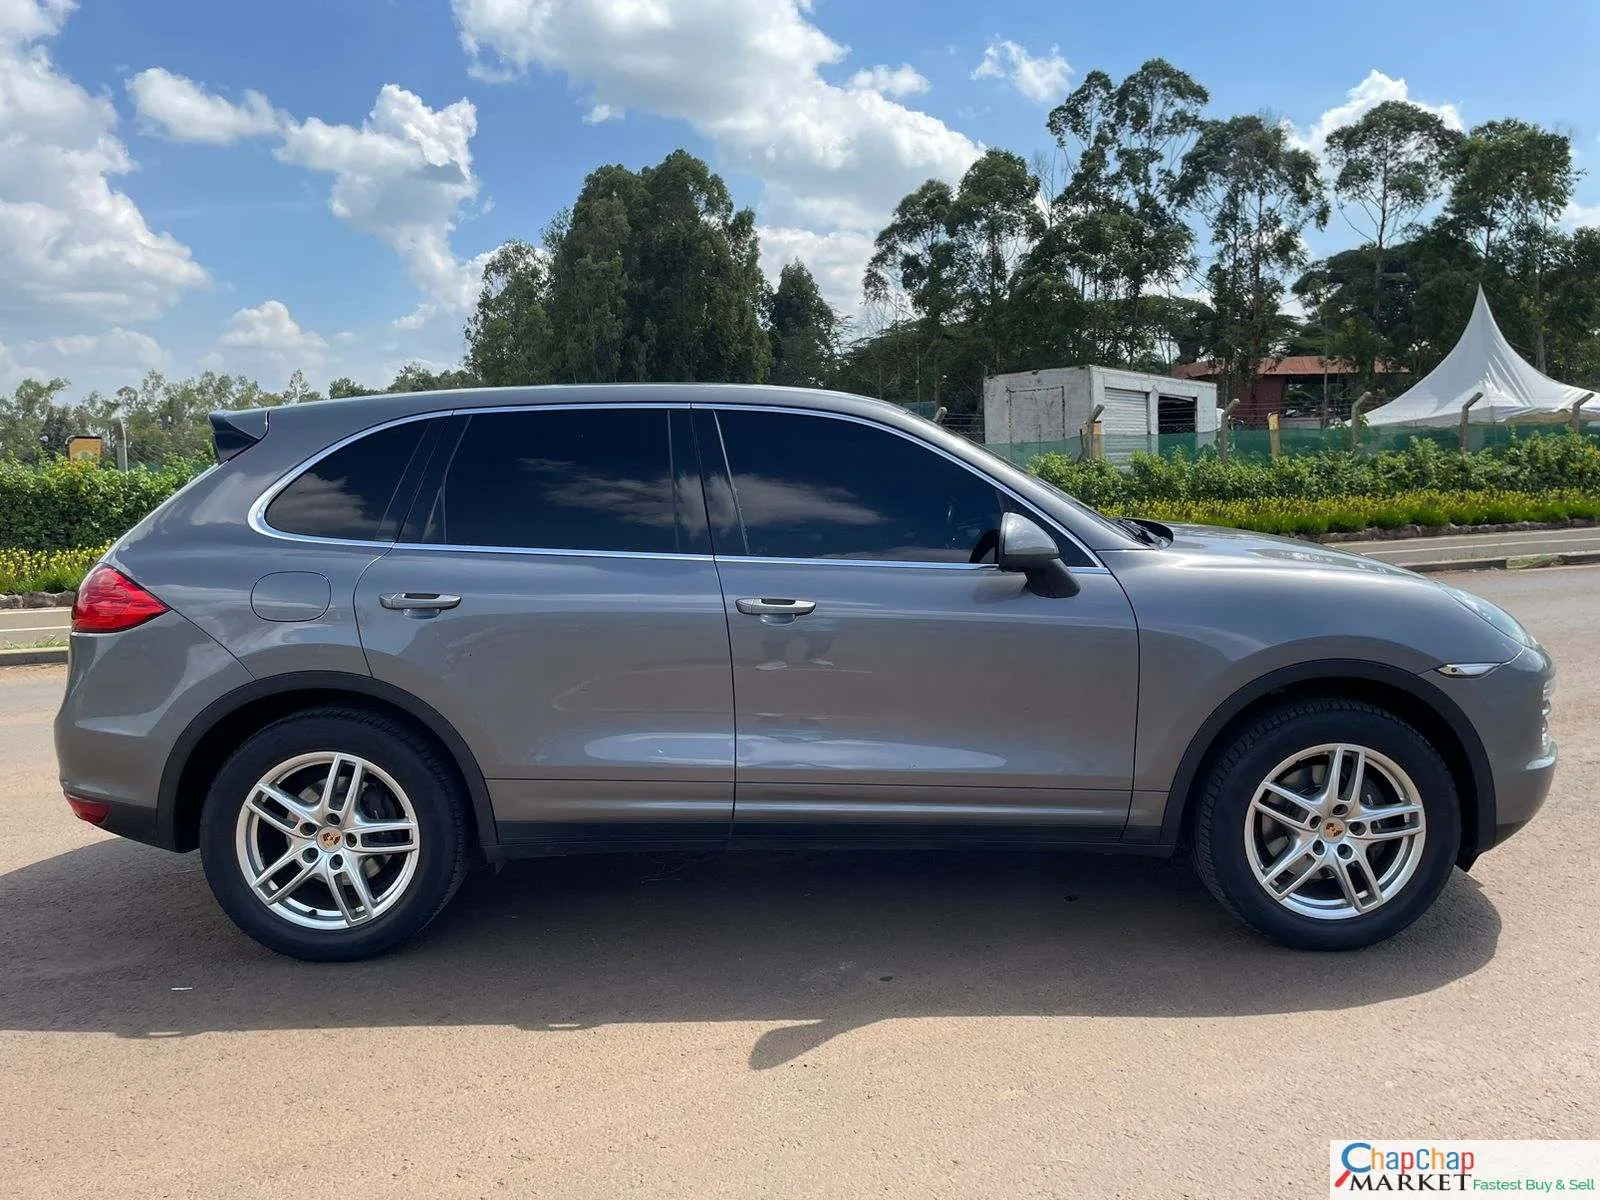 Cars Cars For Sale-Porsche Cayenne Kenya PAY 40% DEPOSIT Trade in OK EXCLUSIVE Porsche Cayenne for sale in Kenya hire purchase installments